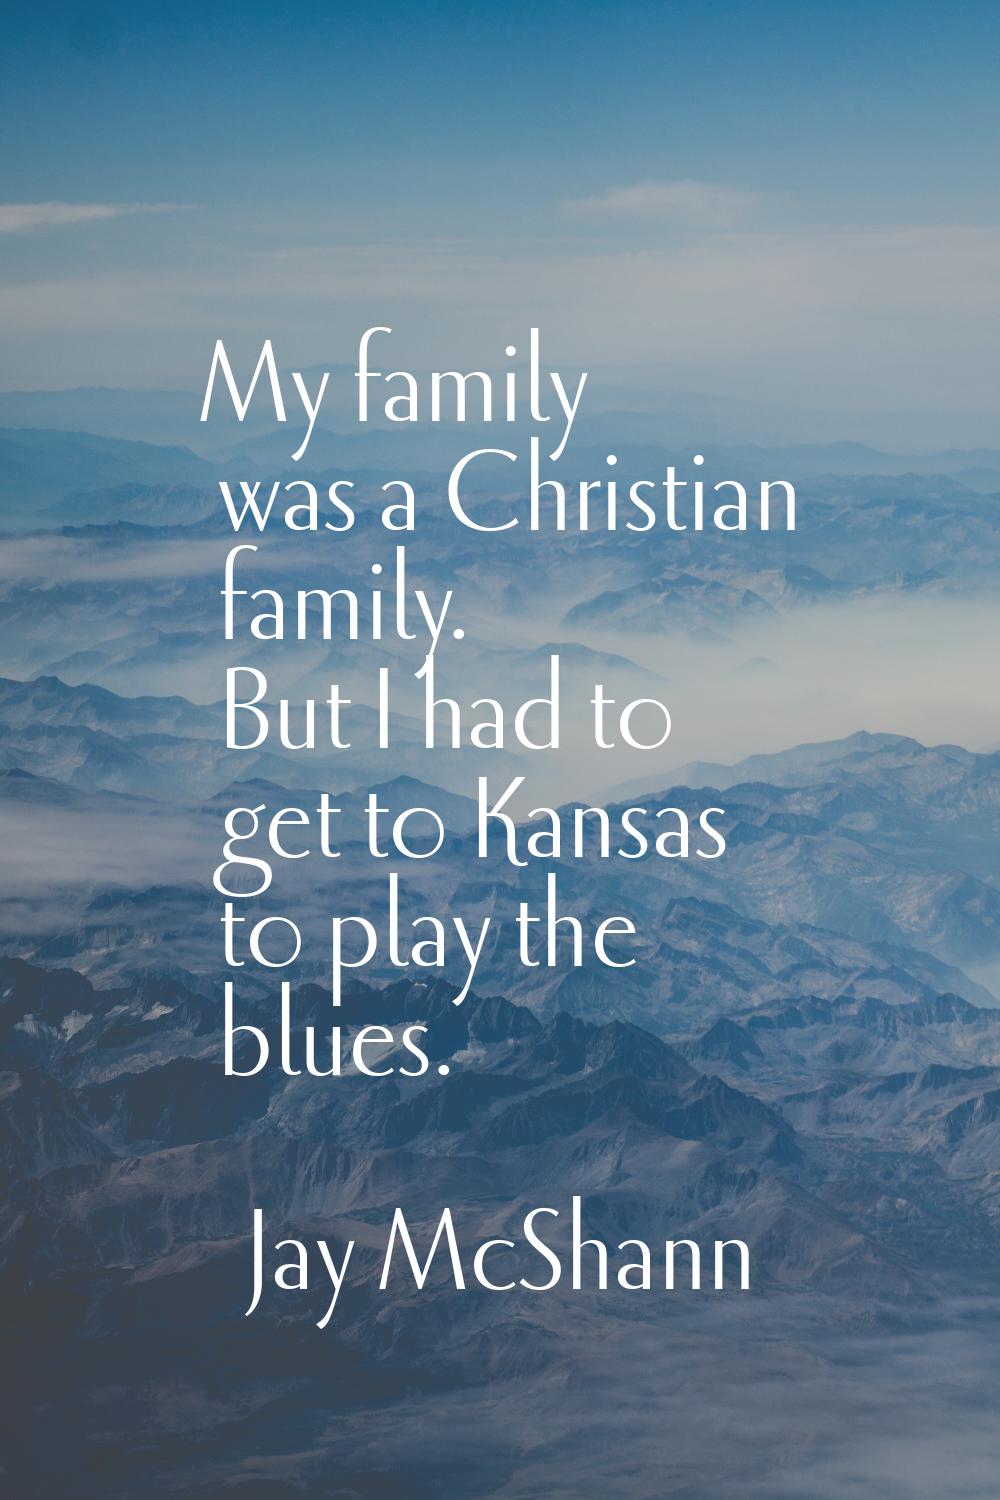 My family was a Christian family. But I had to get to Kansas to play the blues.